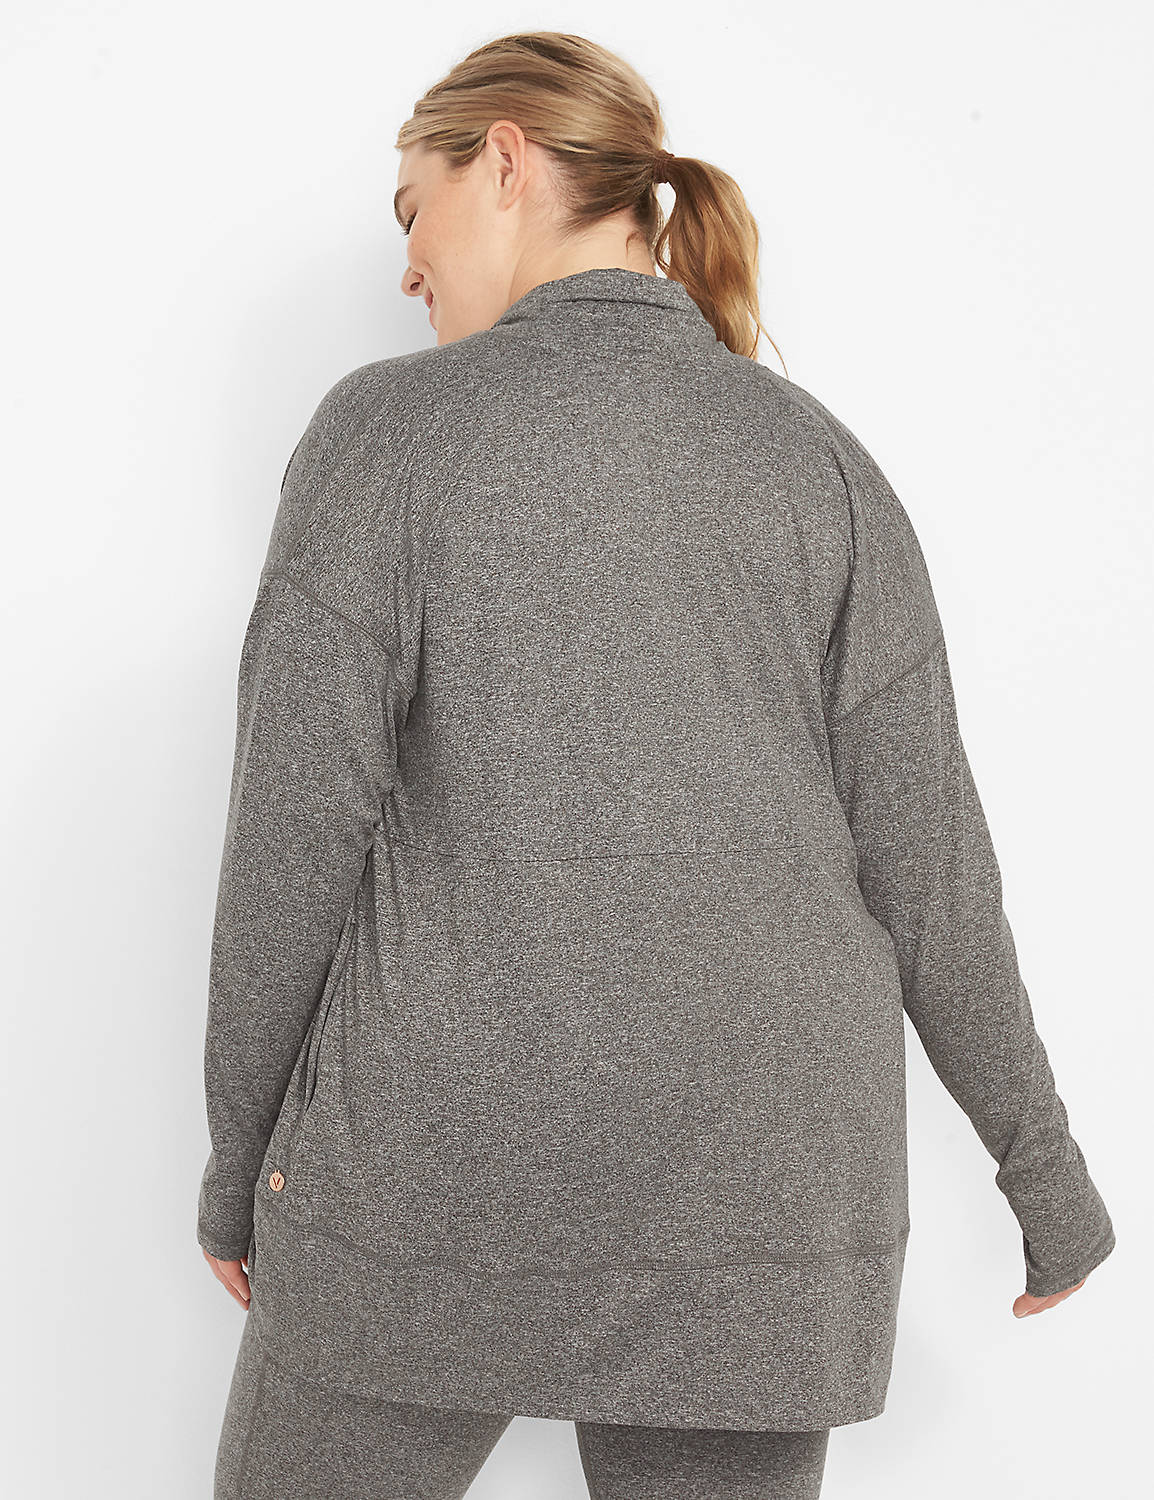 LIVI Soft Cocoon Overpiece - Marl Product Image 2